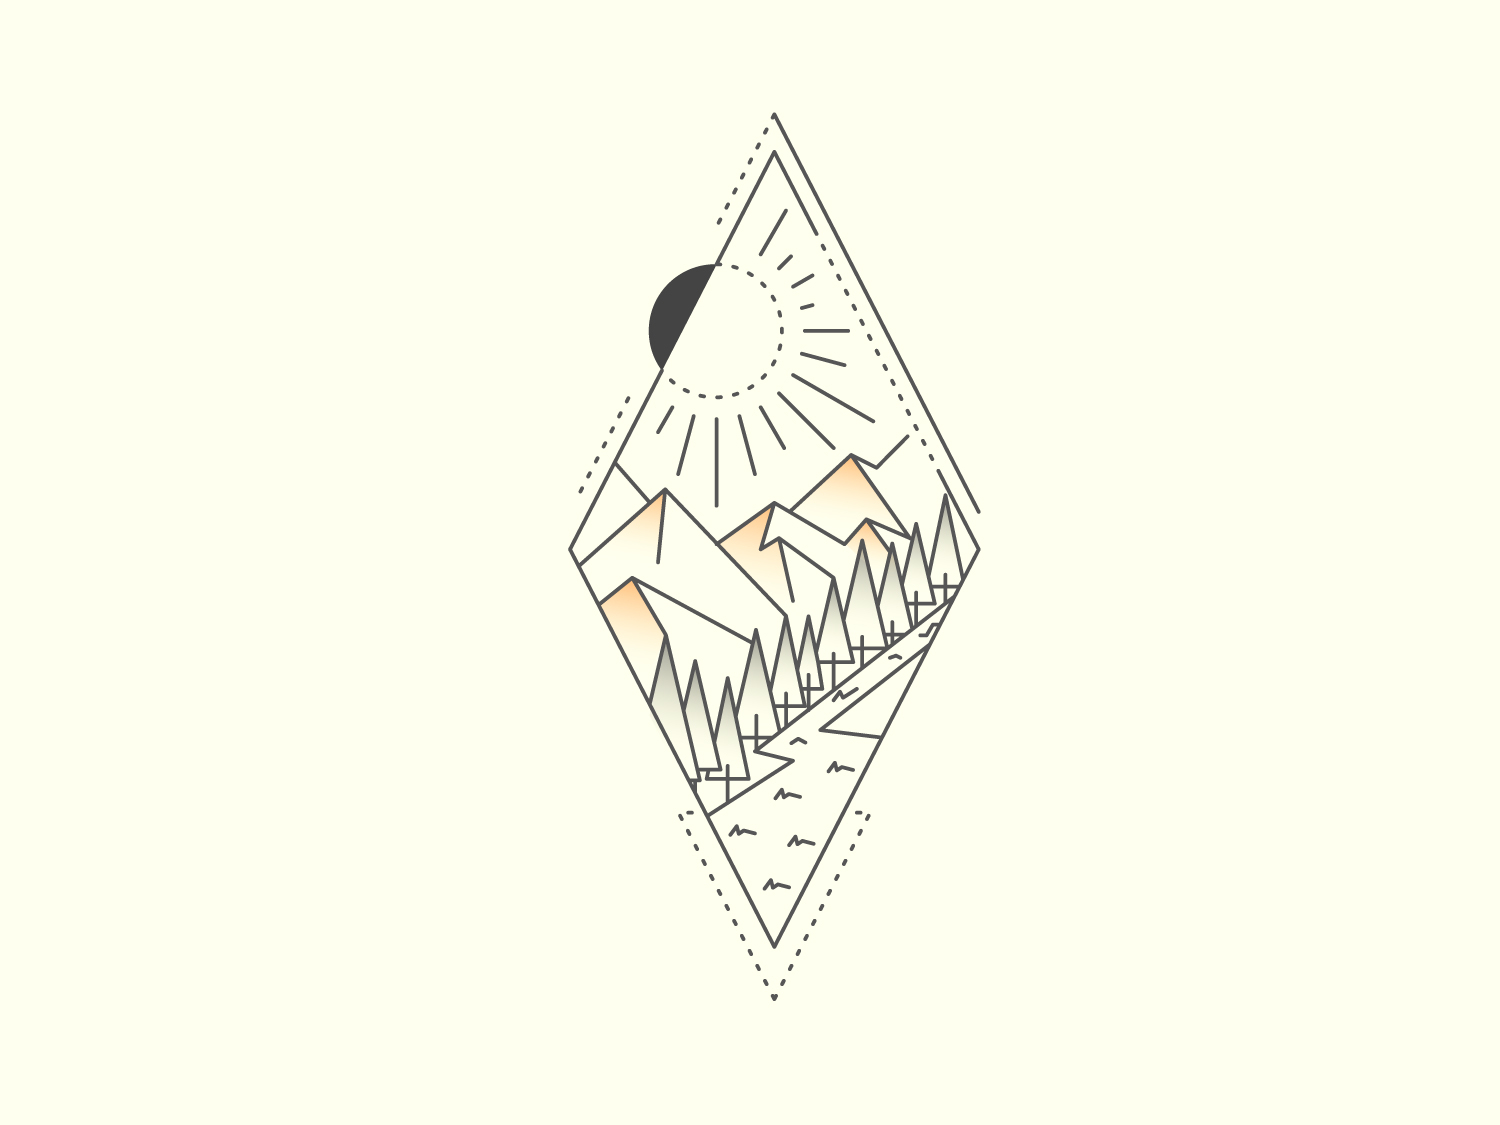 Camp Lord & Taylor Logo by Tess Barnes on Dribbble